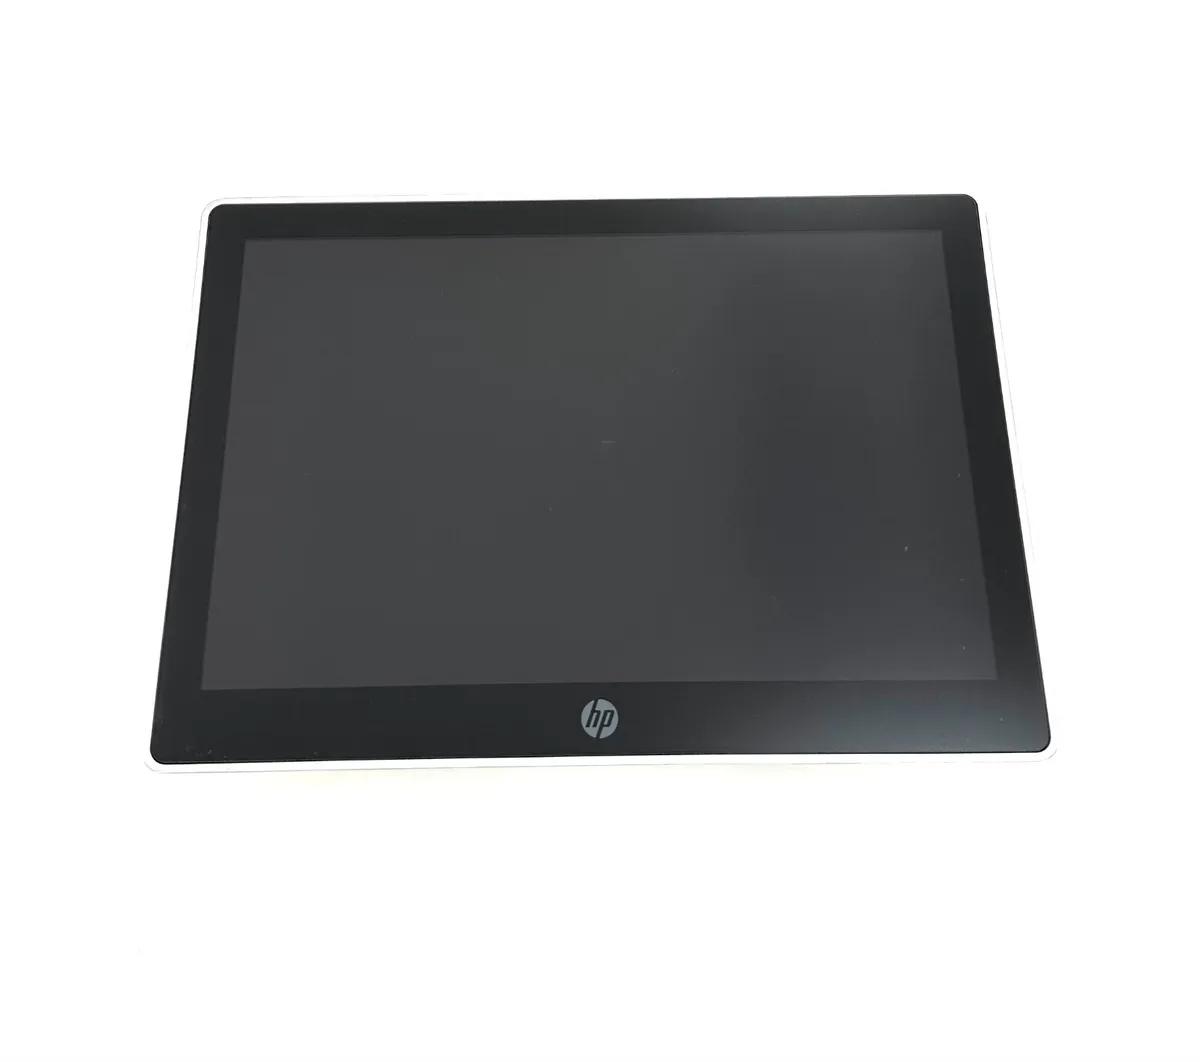 L7010t 10.1-inch Retail Touch Monitor